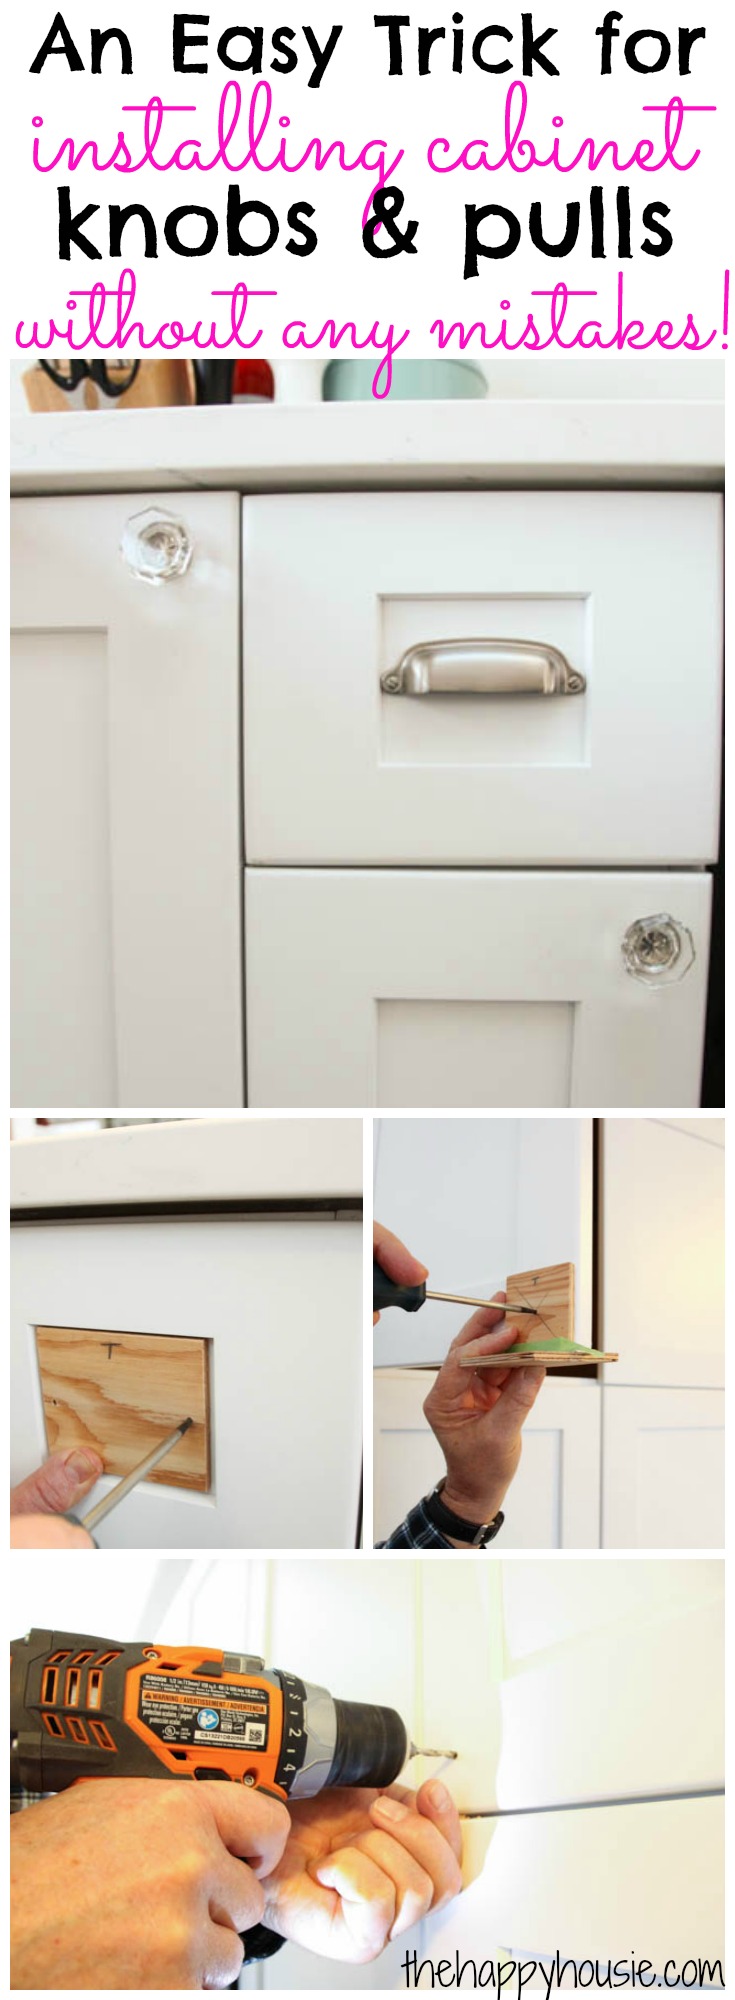 how-to-install-cabinet-knobs-with-a-template-a-trick-for-avoiding